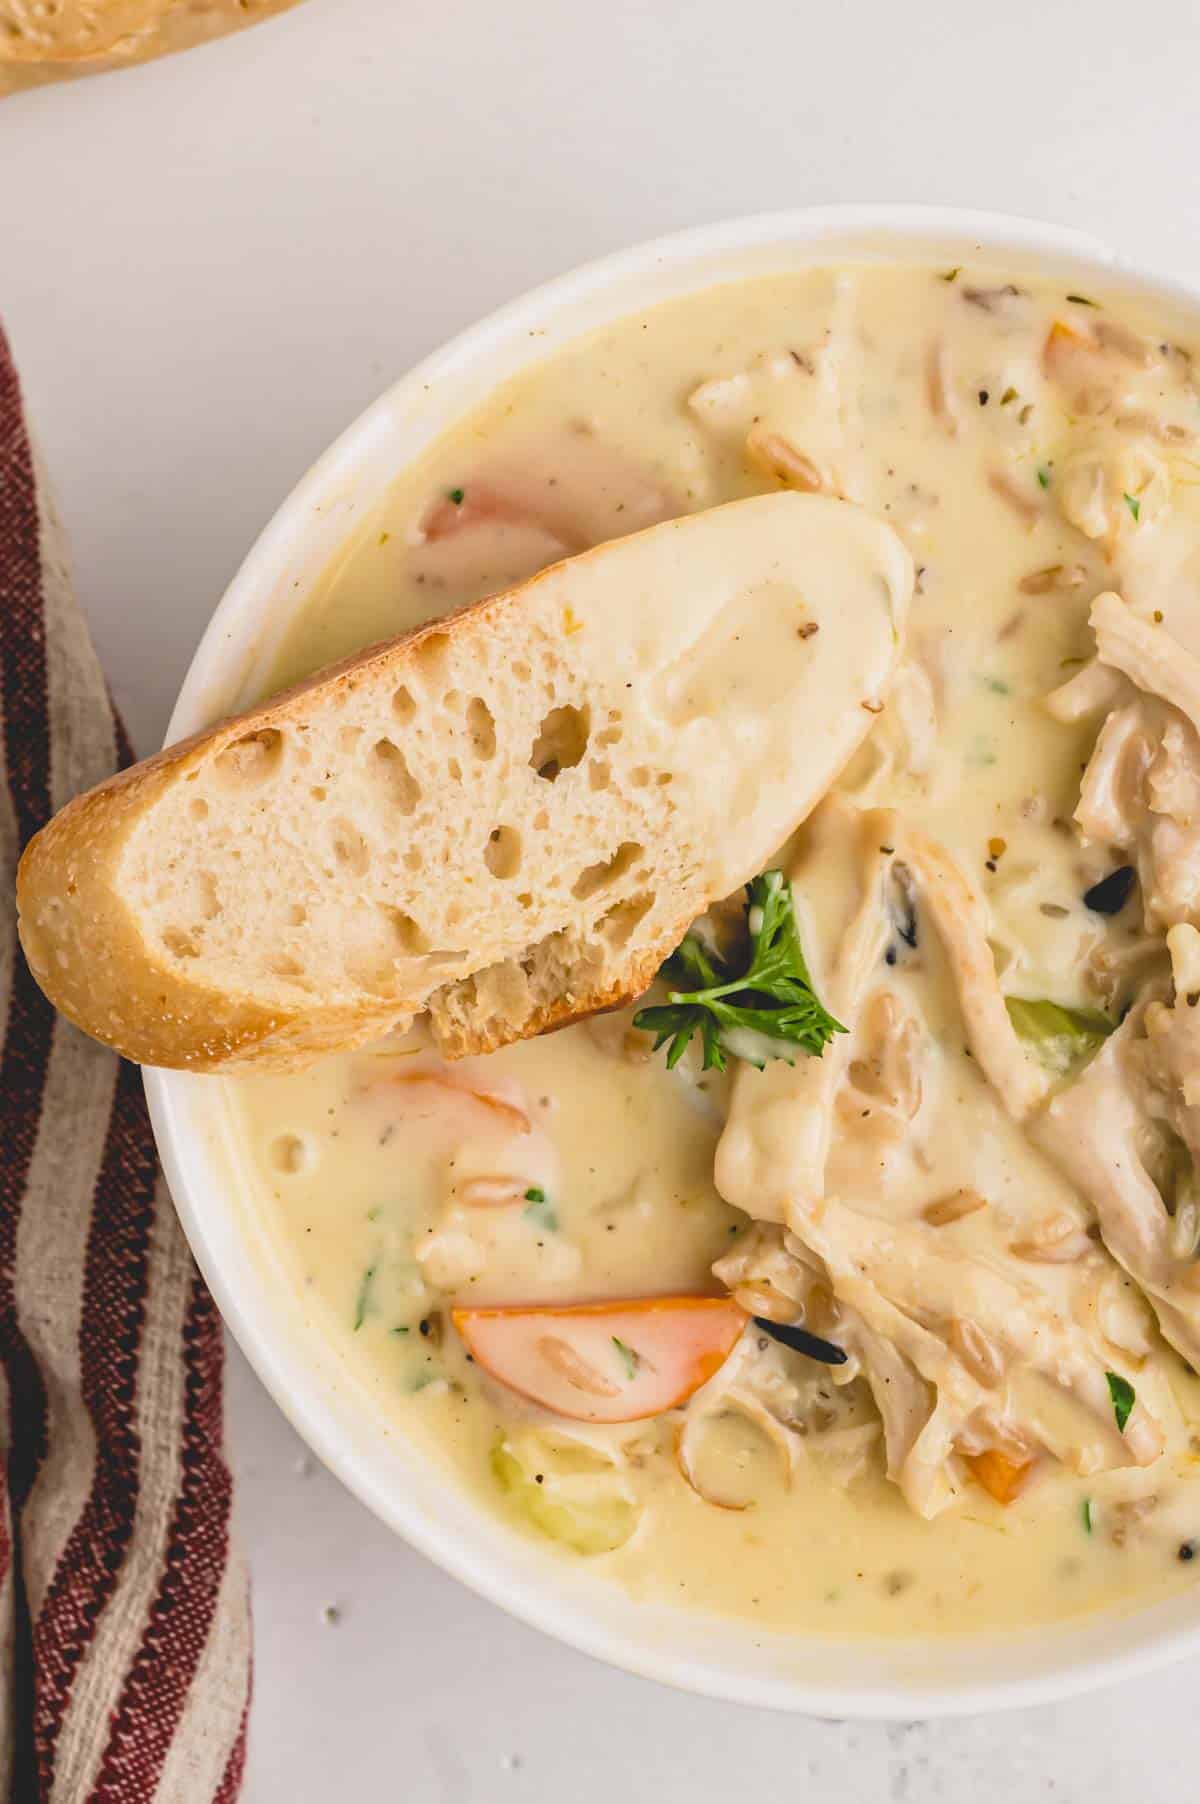 Creamy leftover turkey soup in a bowl with a slice of bread.